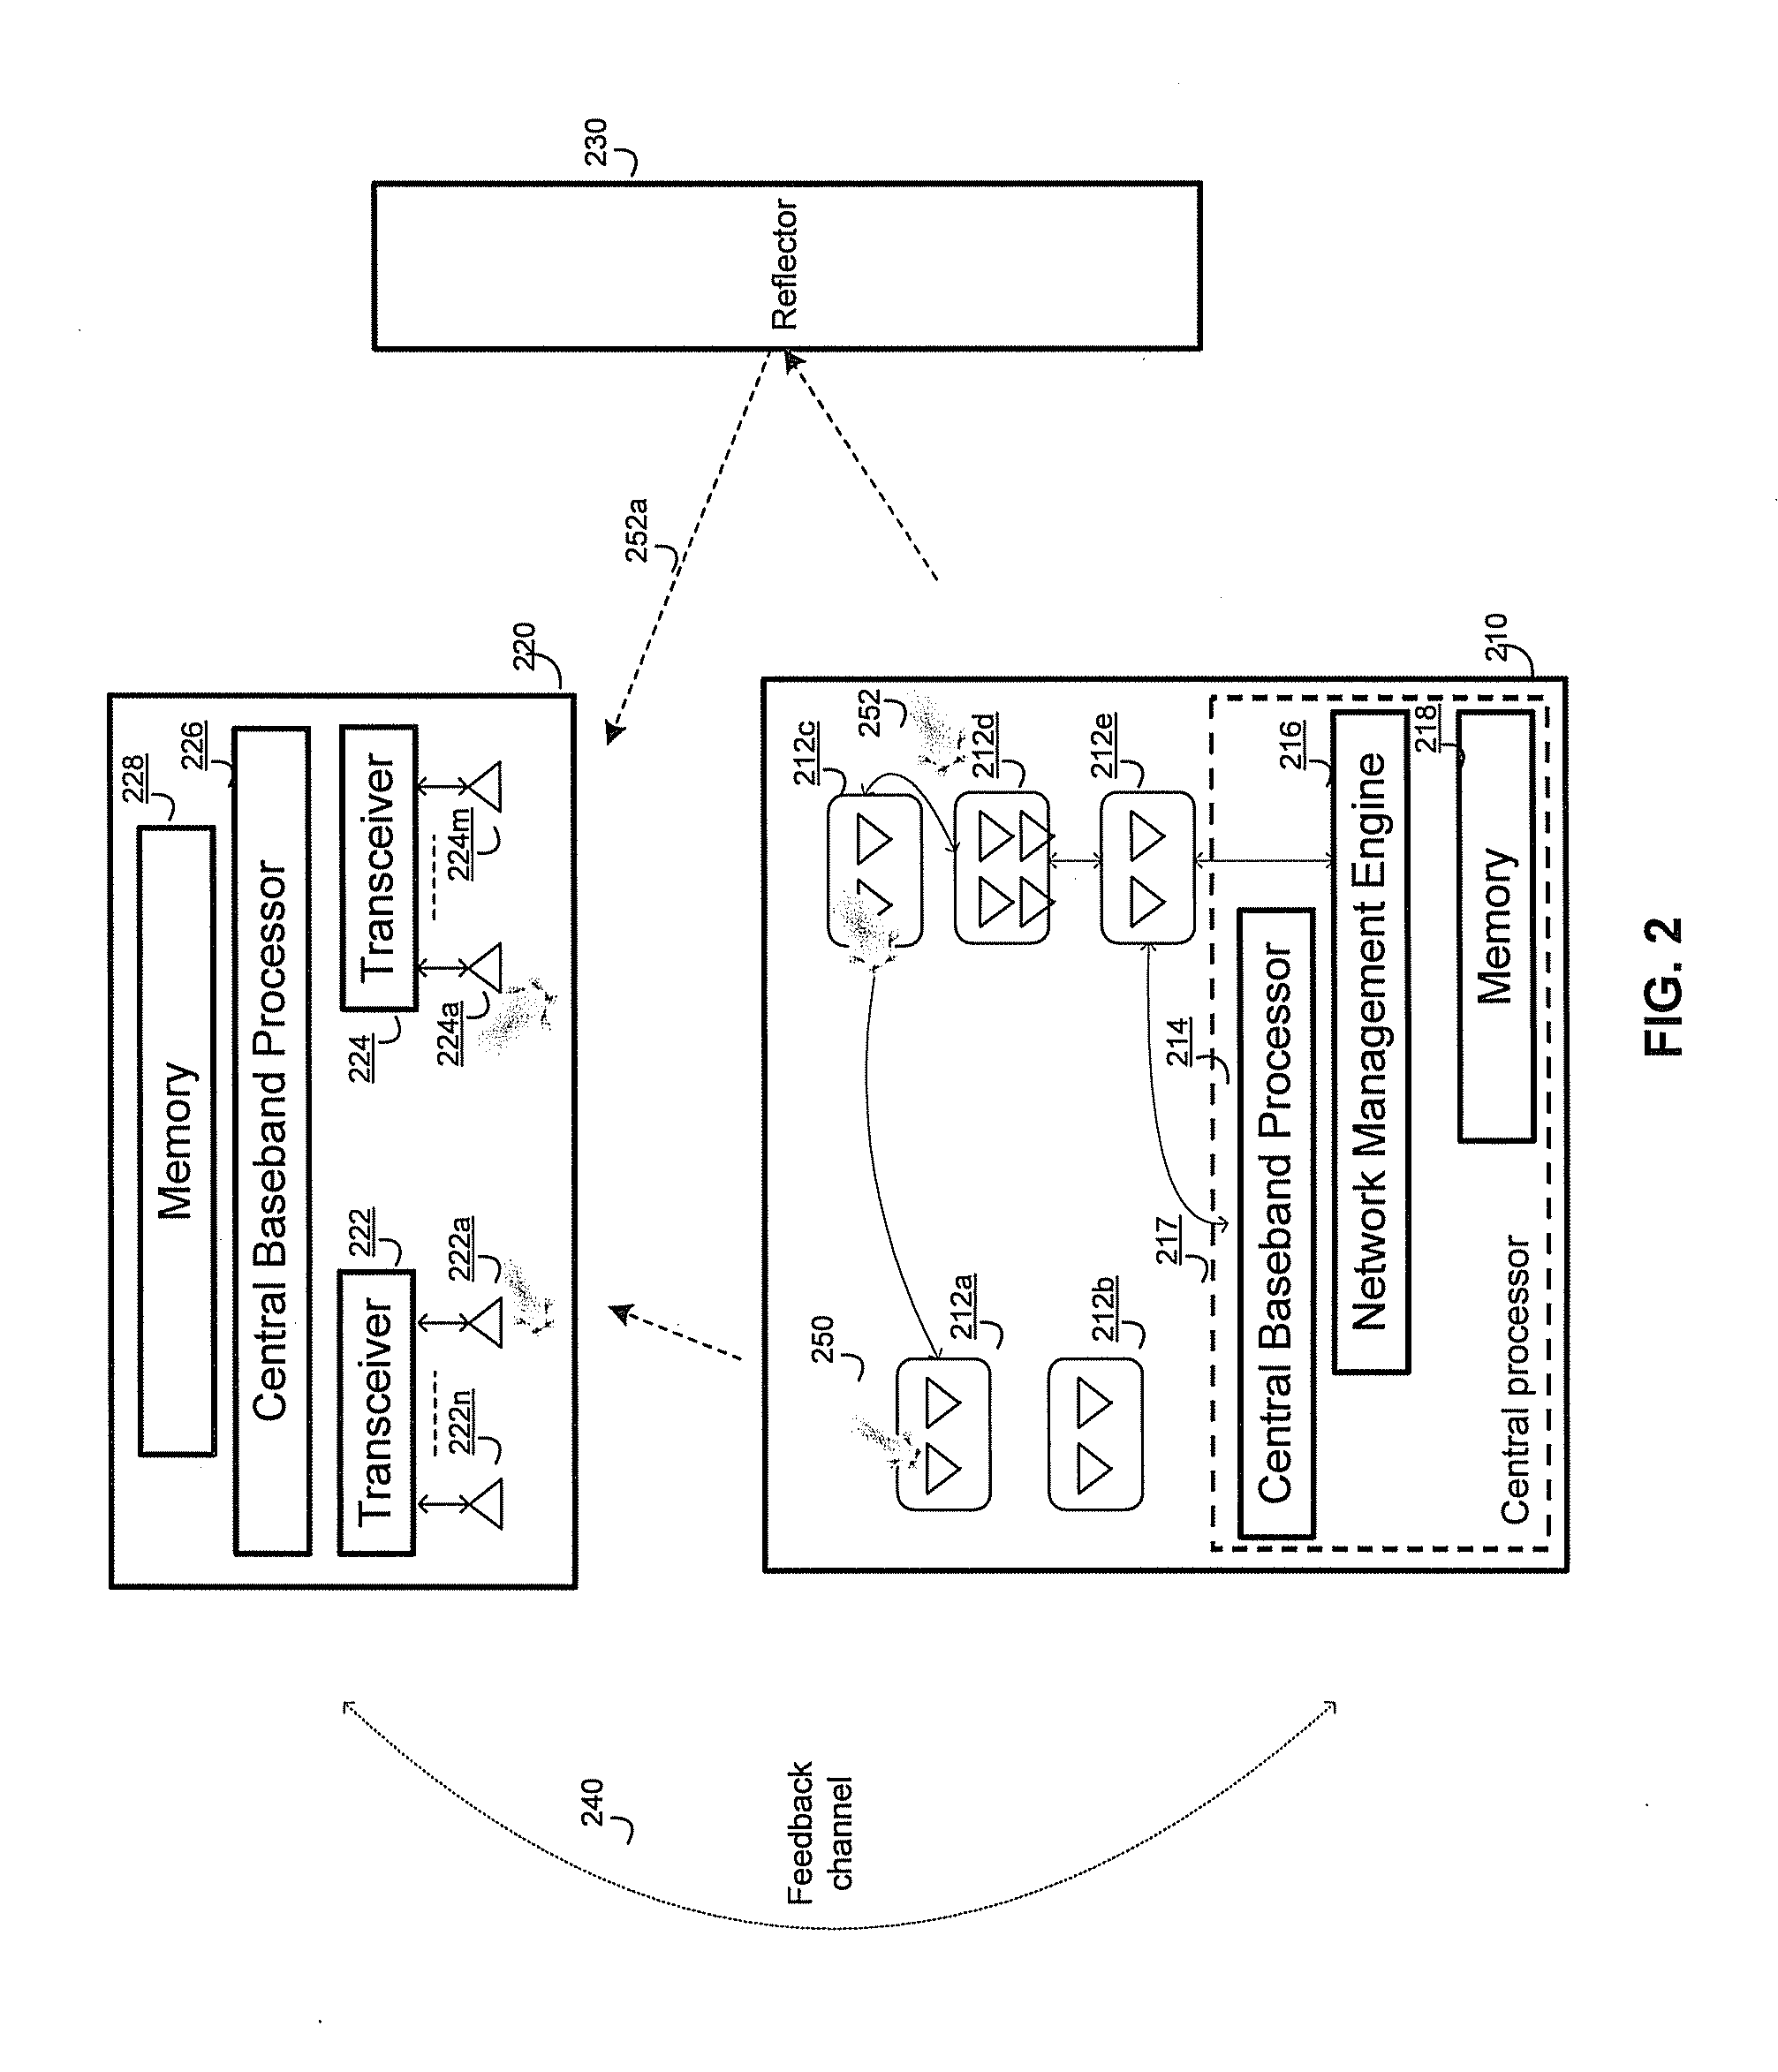 Method and system for centralized distributed transceiver management